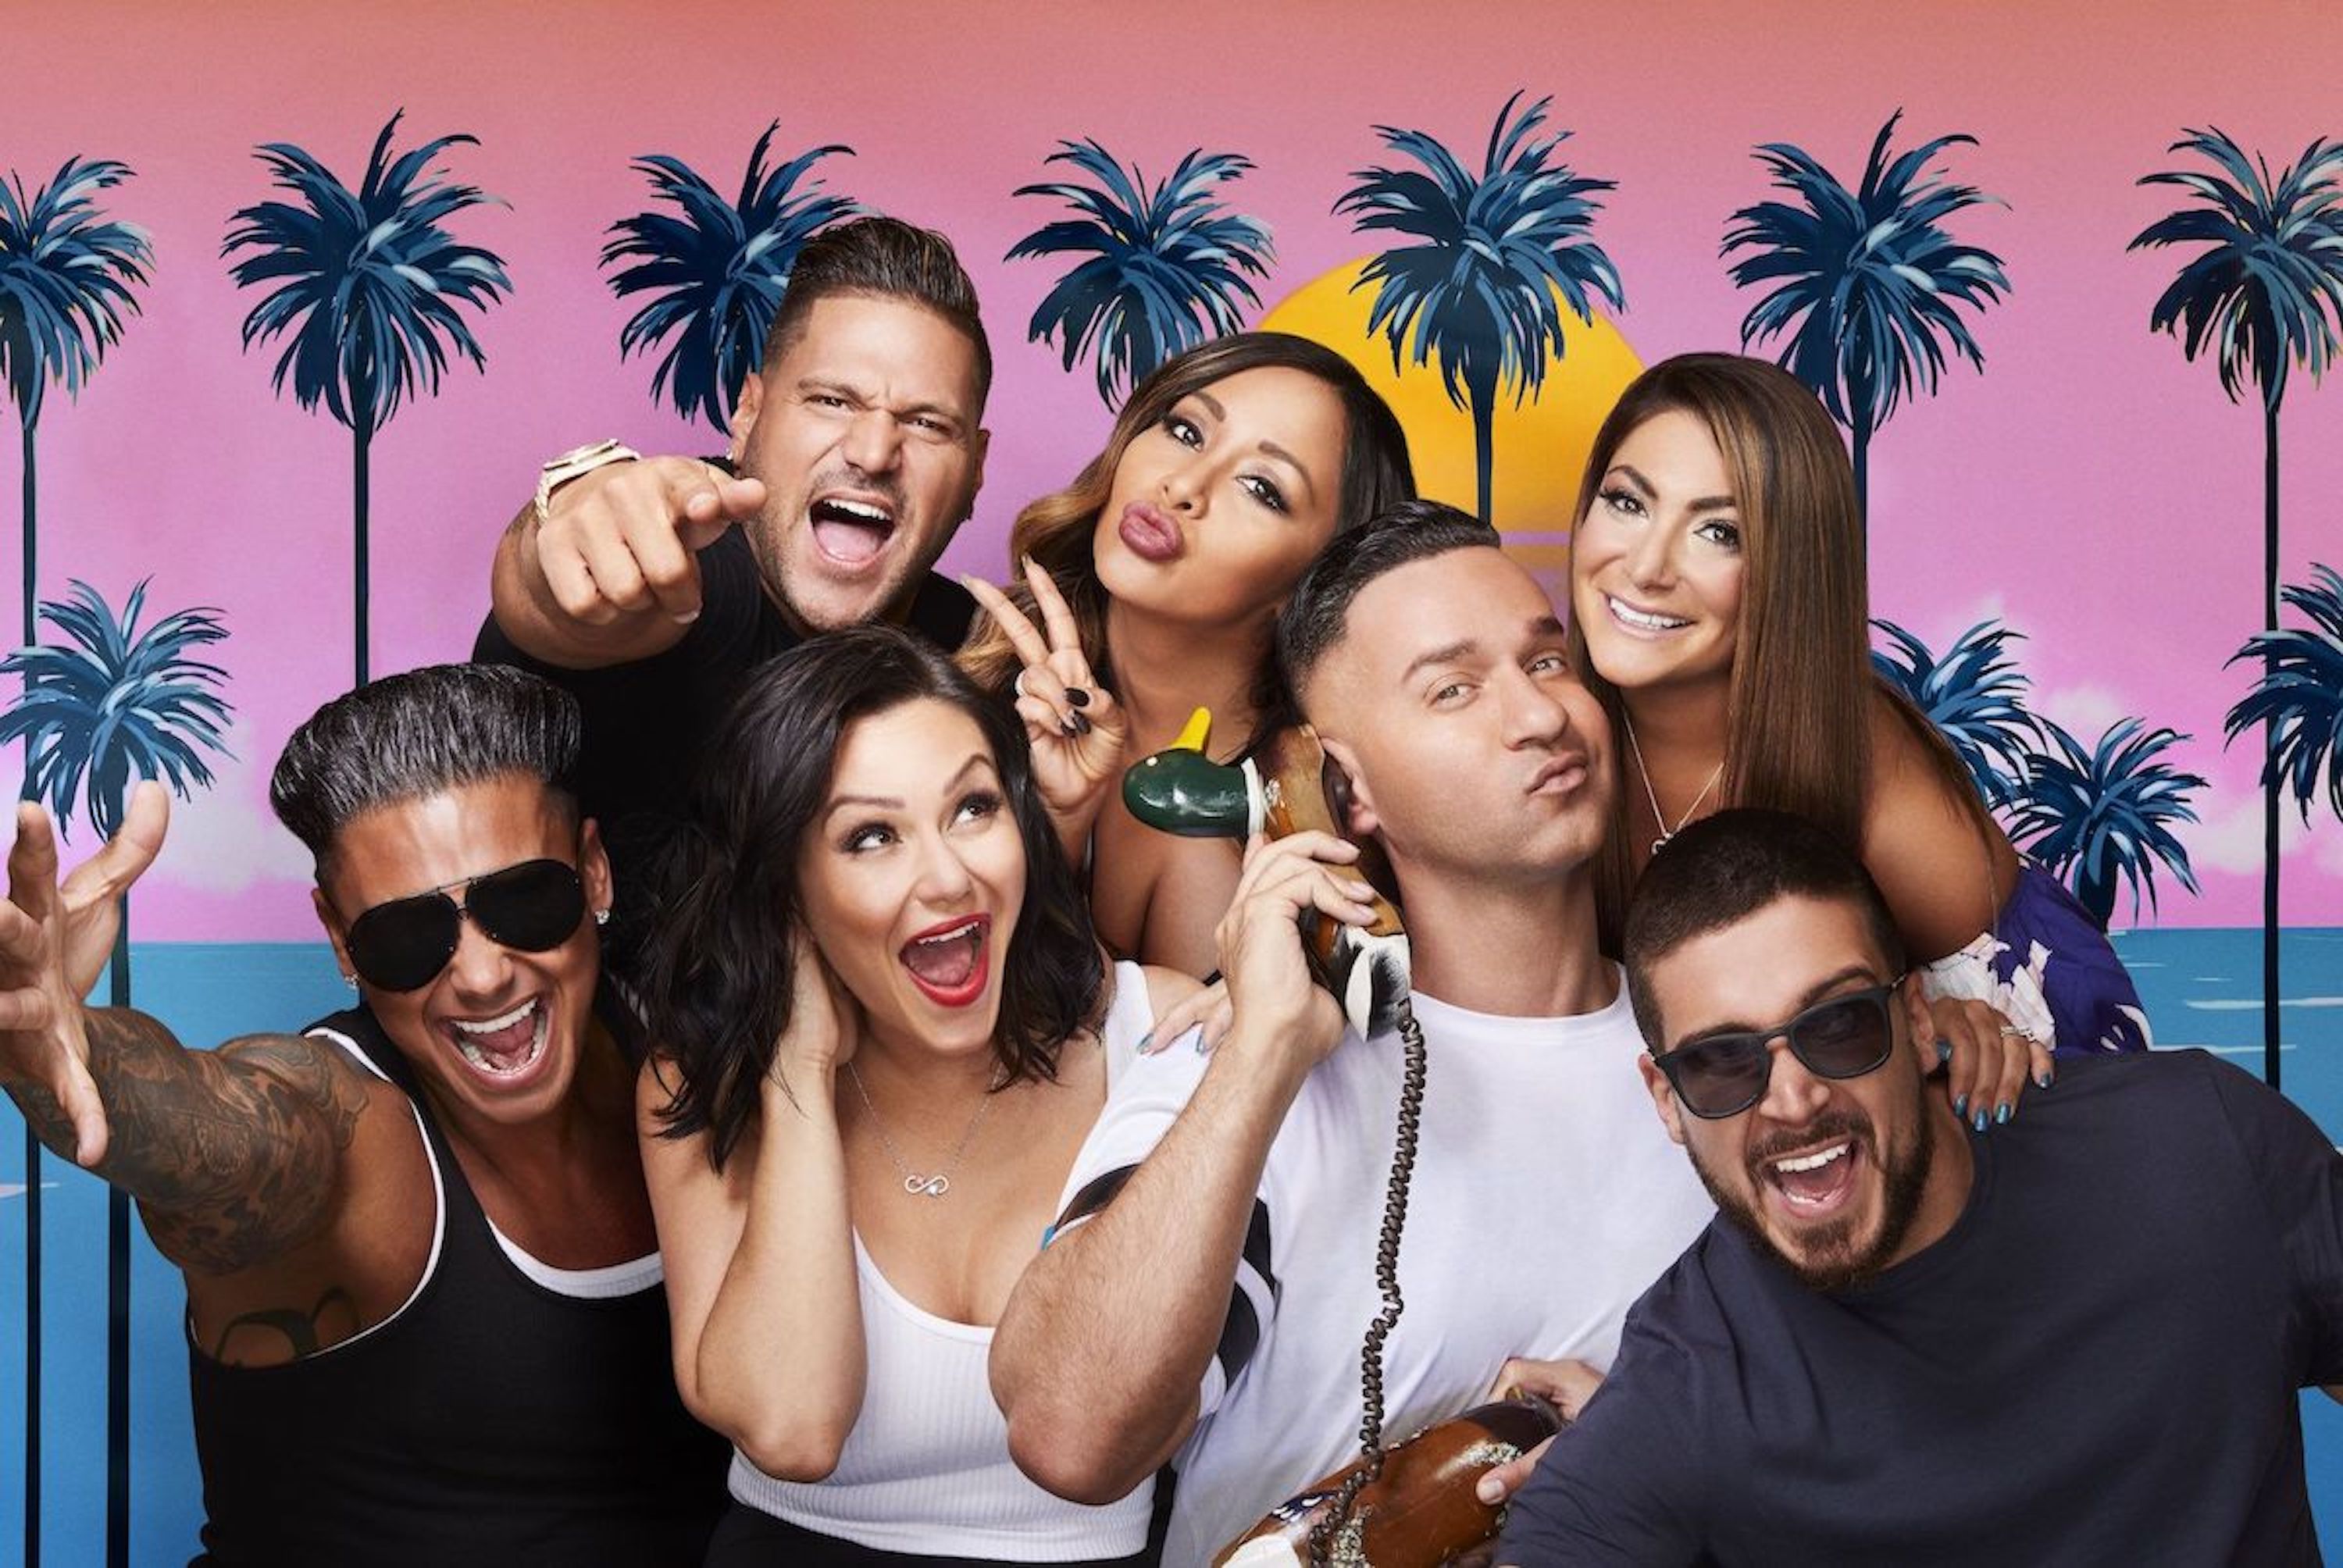 Top left to right: Ronnie Ortiz-Magro, Nicole 'Snooki' Polizzi, and Deena Cortese; Bottom left to right: Pauly DelVecchio, Jenni 'JWoww' Farley, Mike 'The Situation' Sorrentino, and Vinny Guadagnino